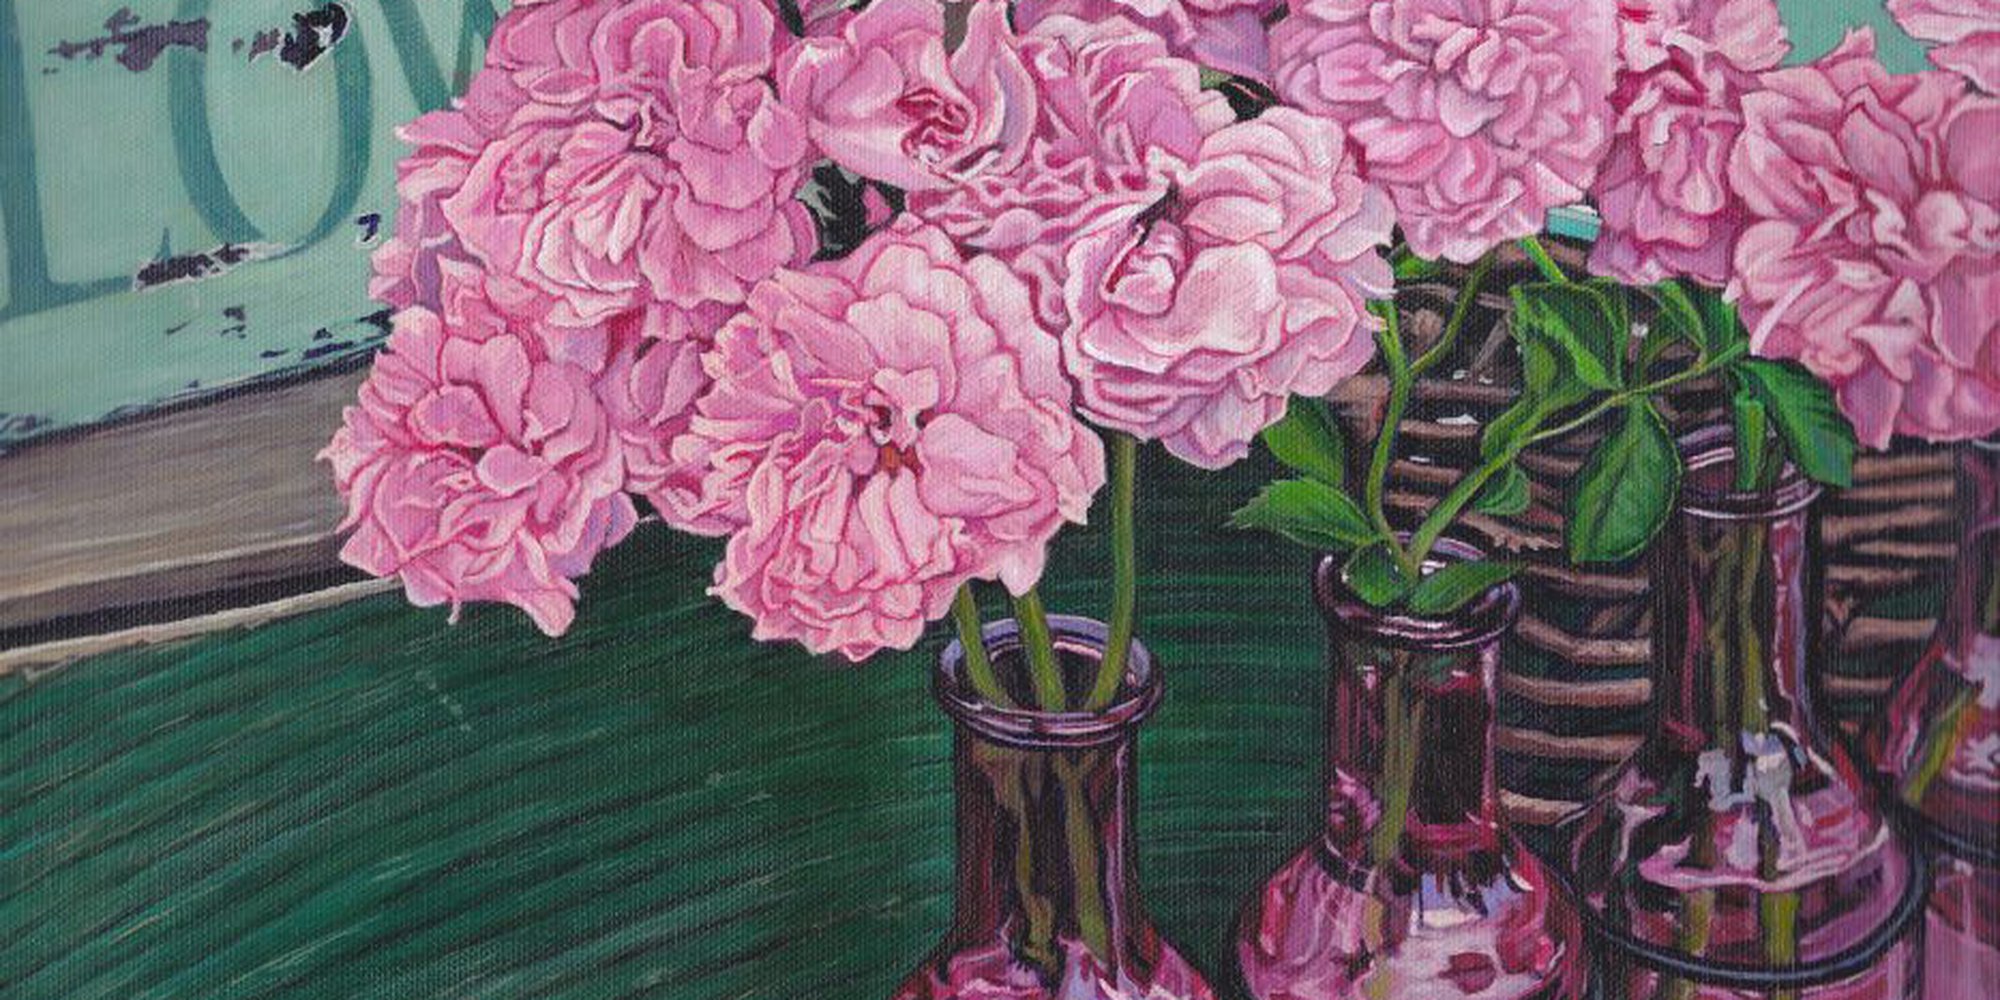 Art of the Day: "Peonies at the Farmers Market, 2017" by Paige Wallis